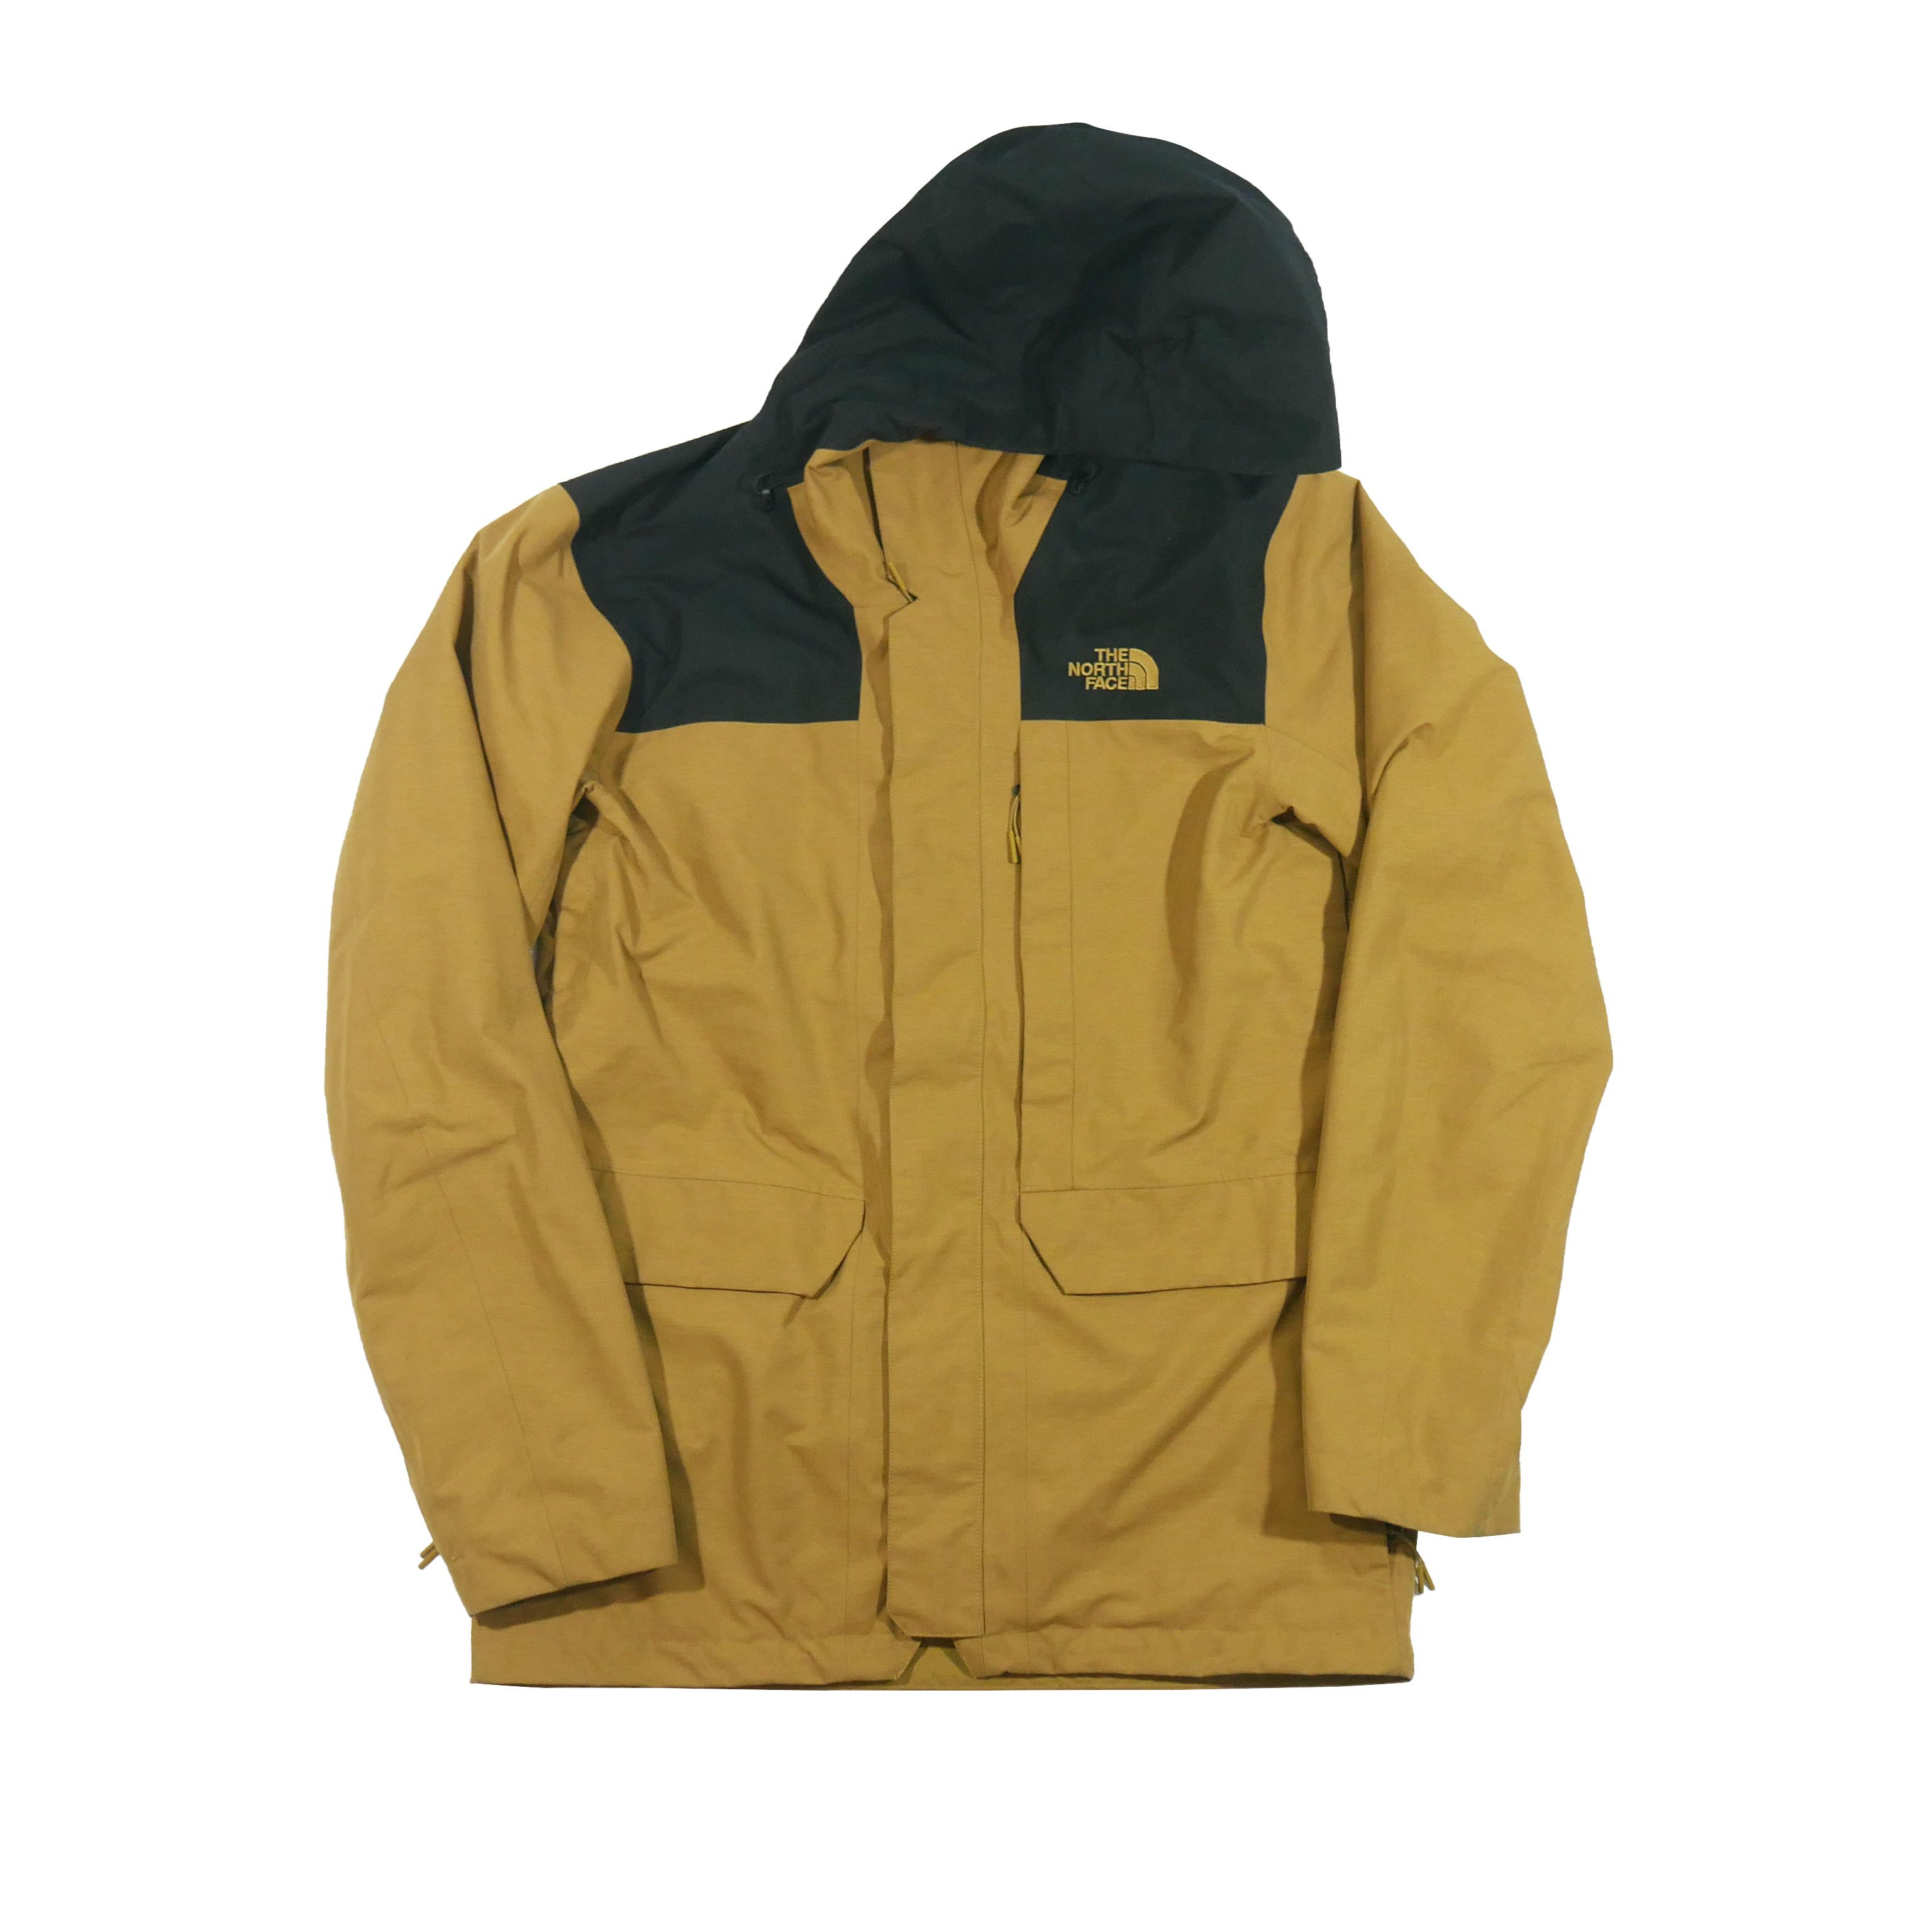 The North Face Alligare Thermoball Triclimate 3-in-1 Jacket | Grailed